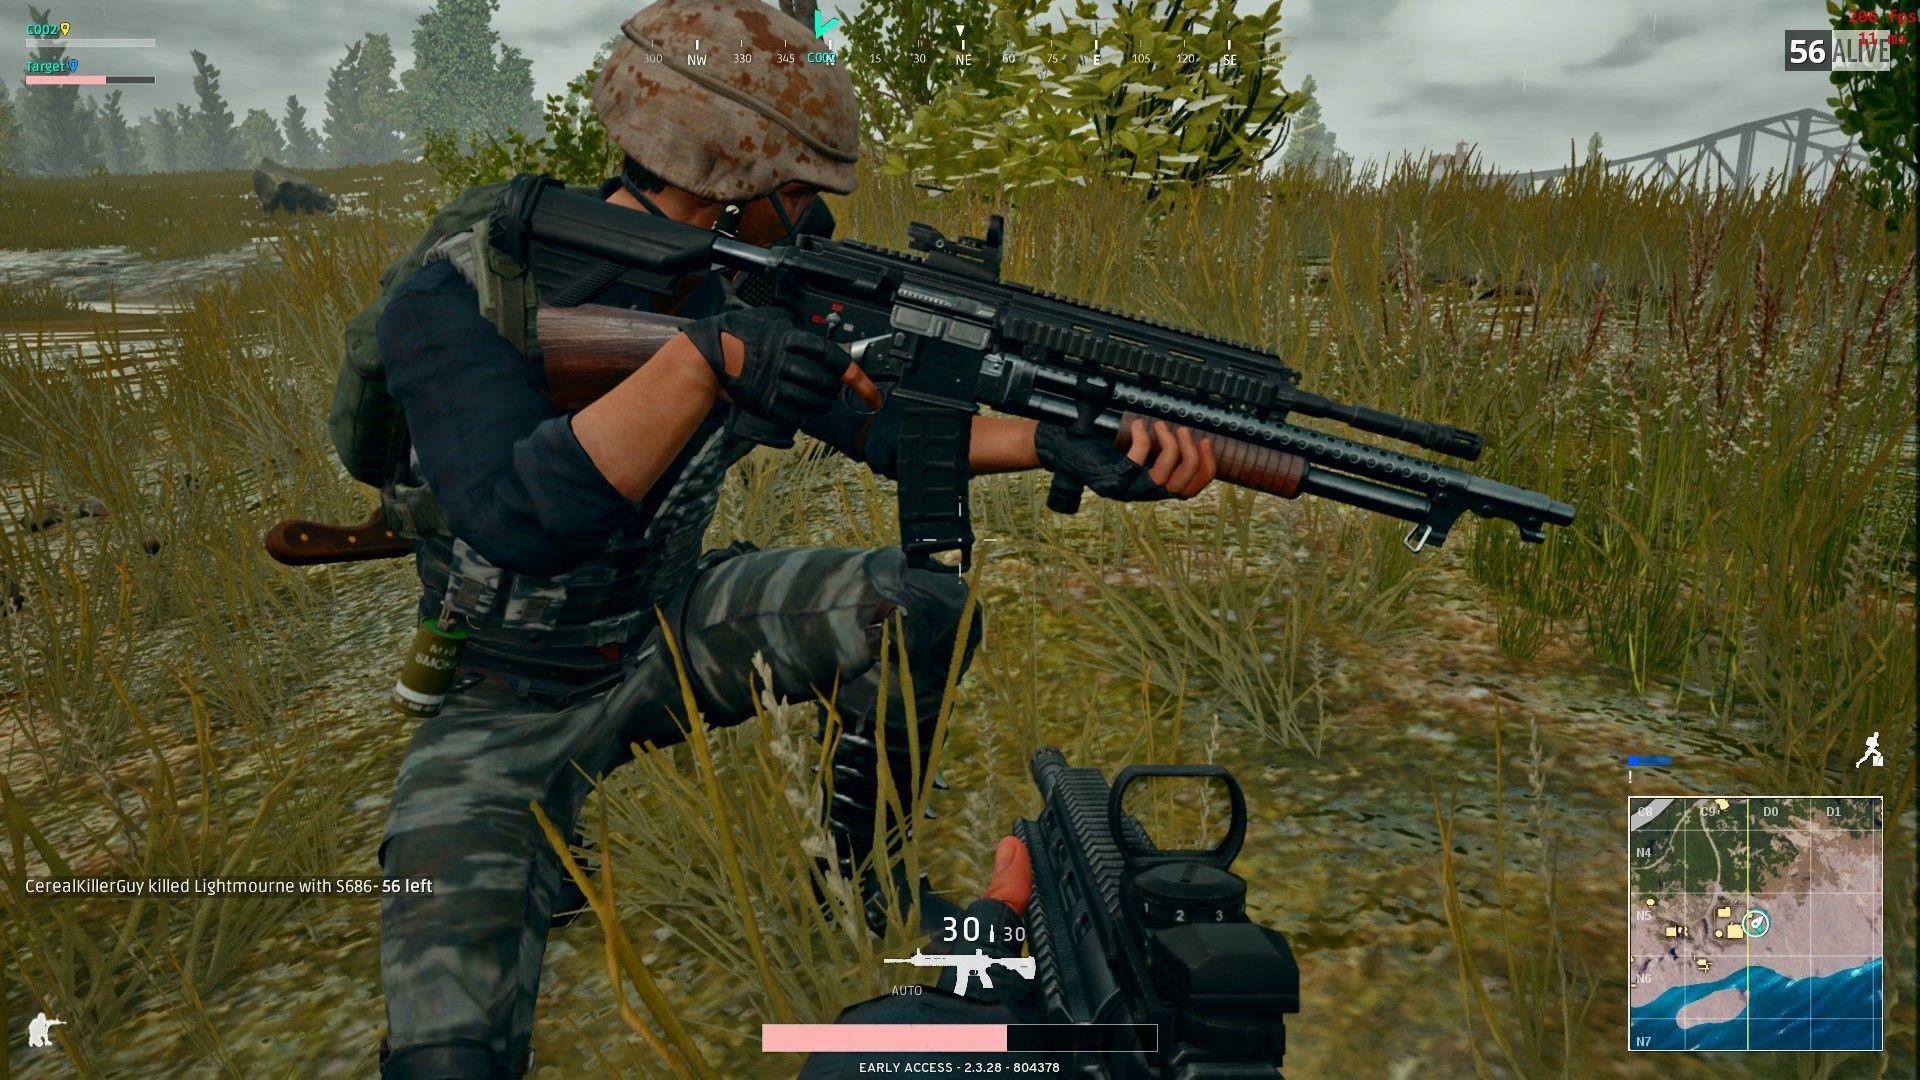 Is this the new PUBG gun? Discussion & Feedback